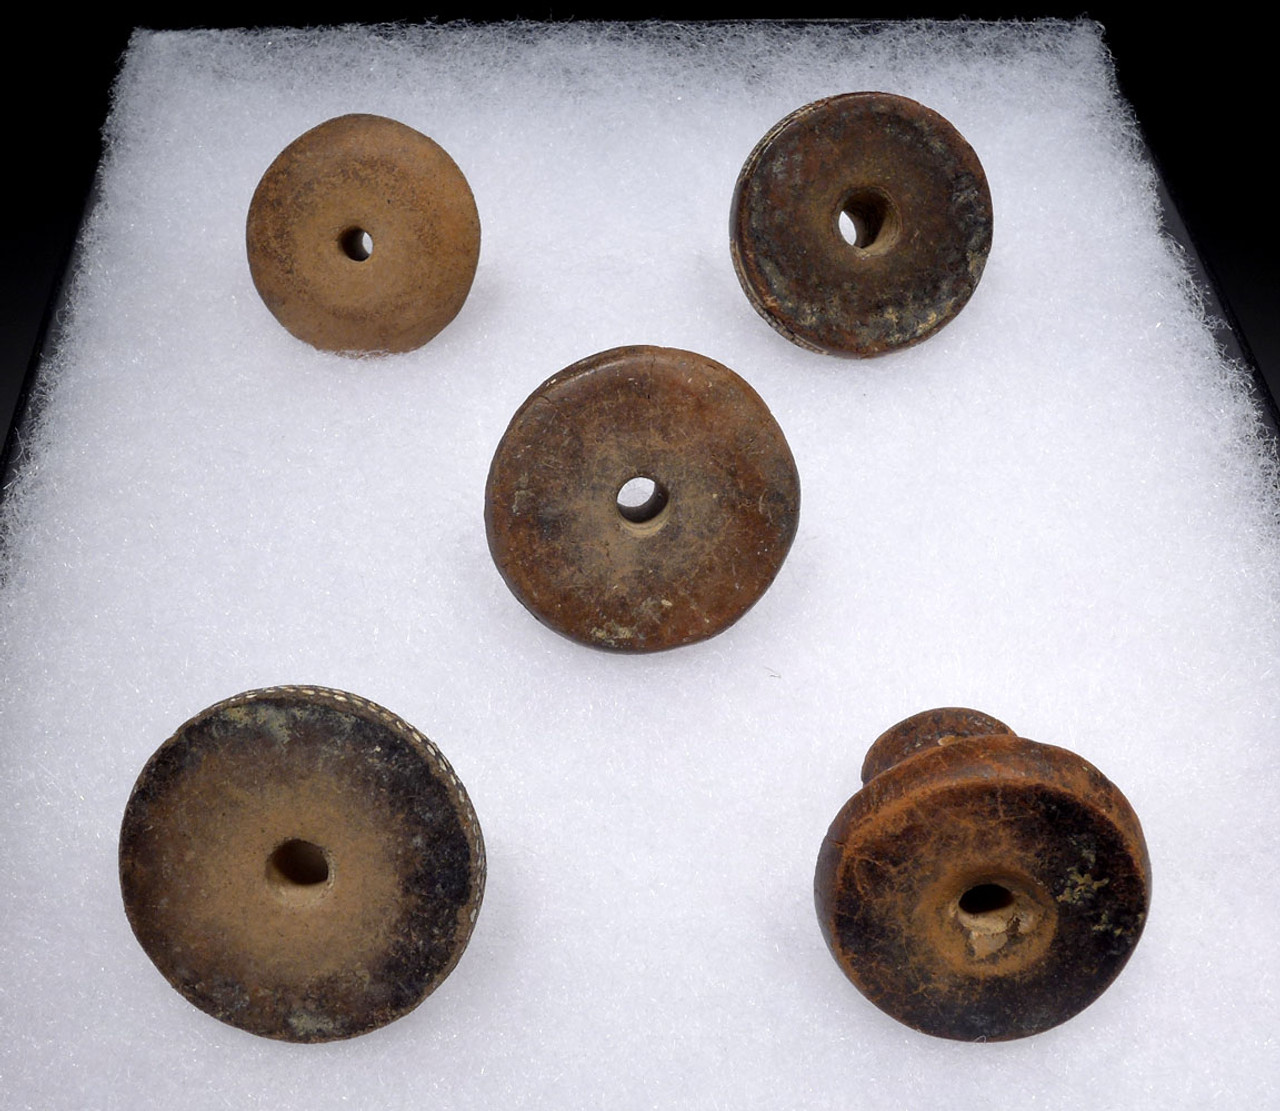 FIVE PRE-COLUMBIAN QUIMBAYA ANCIENT TEXTILE SPINDLE WHORLS FROM SOUTH AMERICA  *PC358